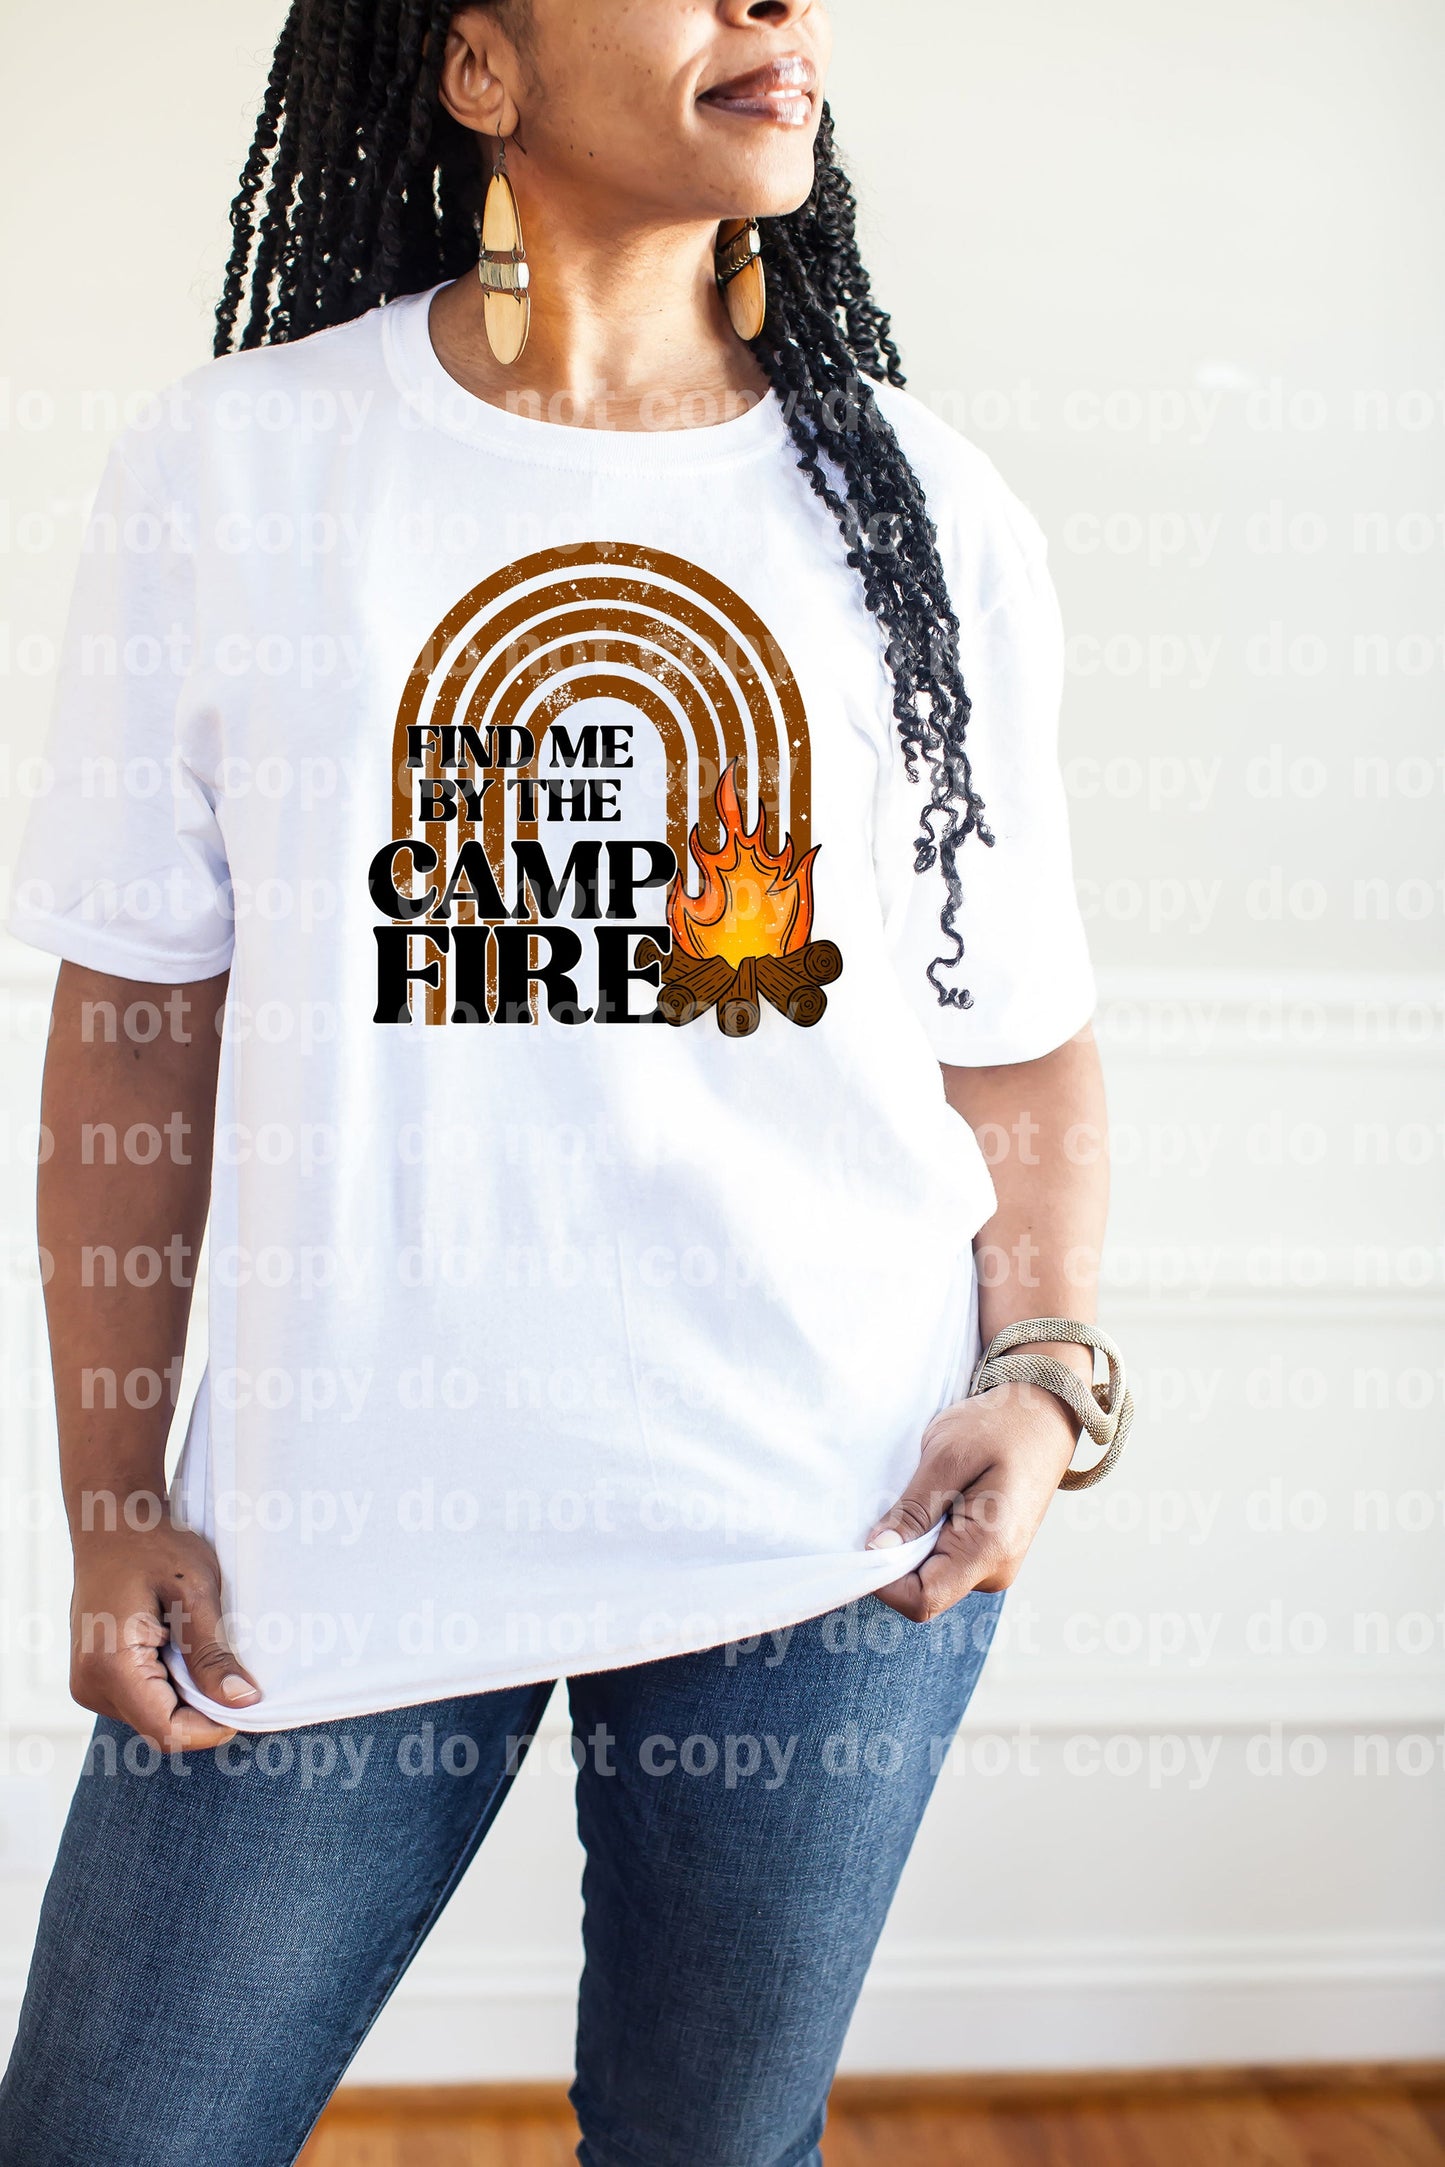 Find Me By The Campfire Dream Print or Sublimation Print